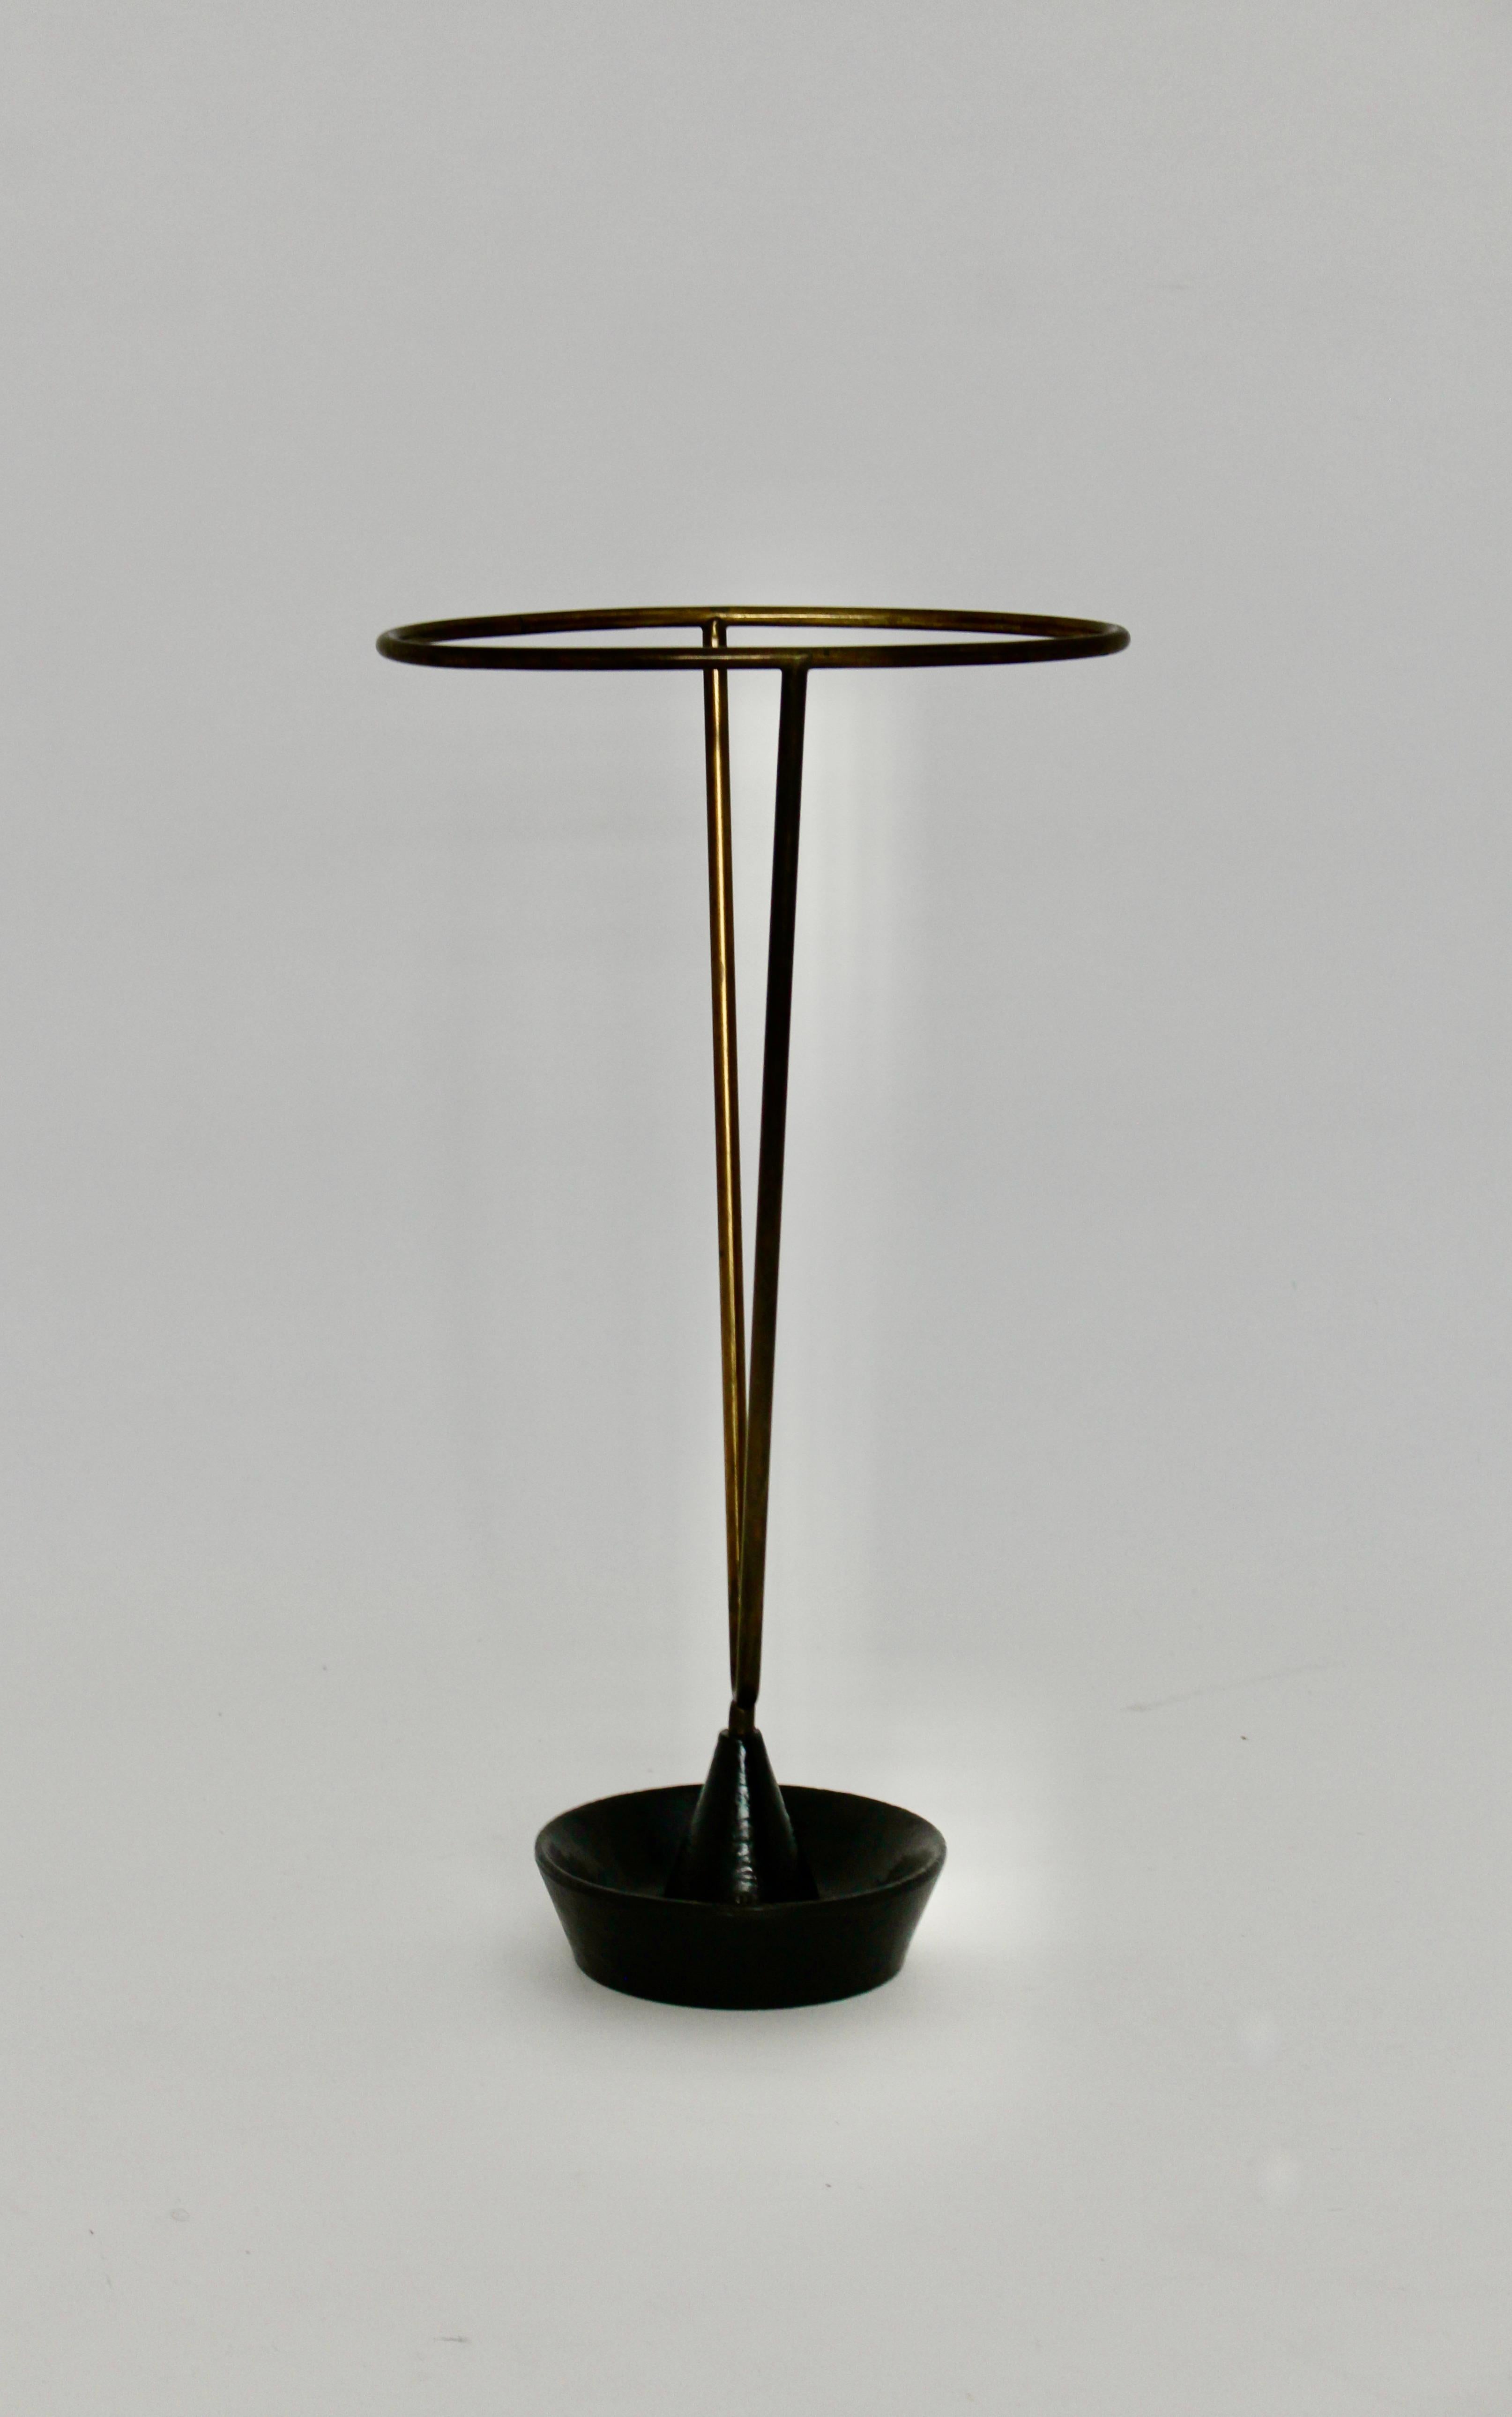 Modernist vintage authentic umbrella stand or cane holder by
Carl Auböck for workshop Auböck 1950s Vienna.
The wonderful umbrella stand or cane holder from black lacquered metal and brass shows original condition with beloved signs of age and use